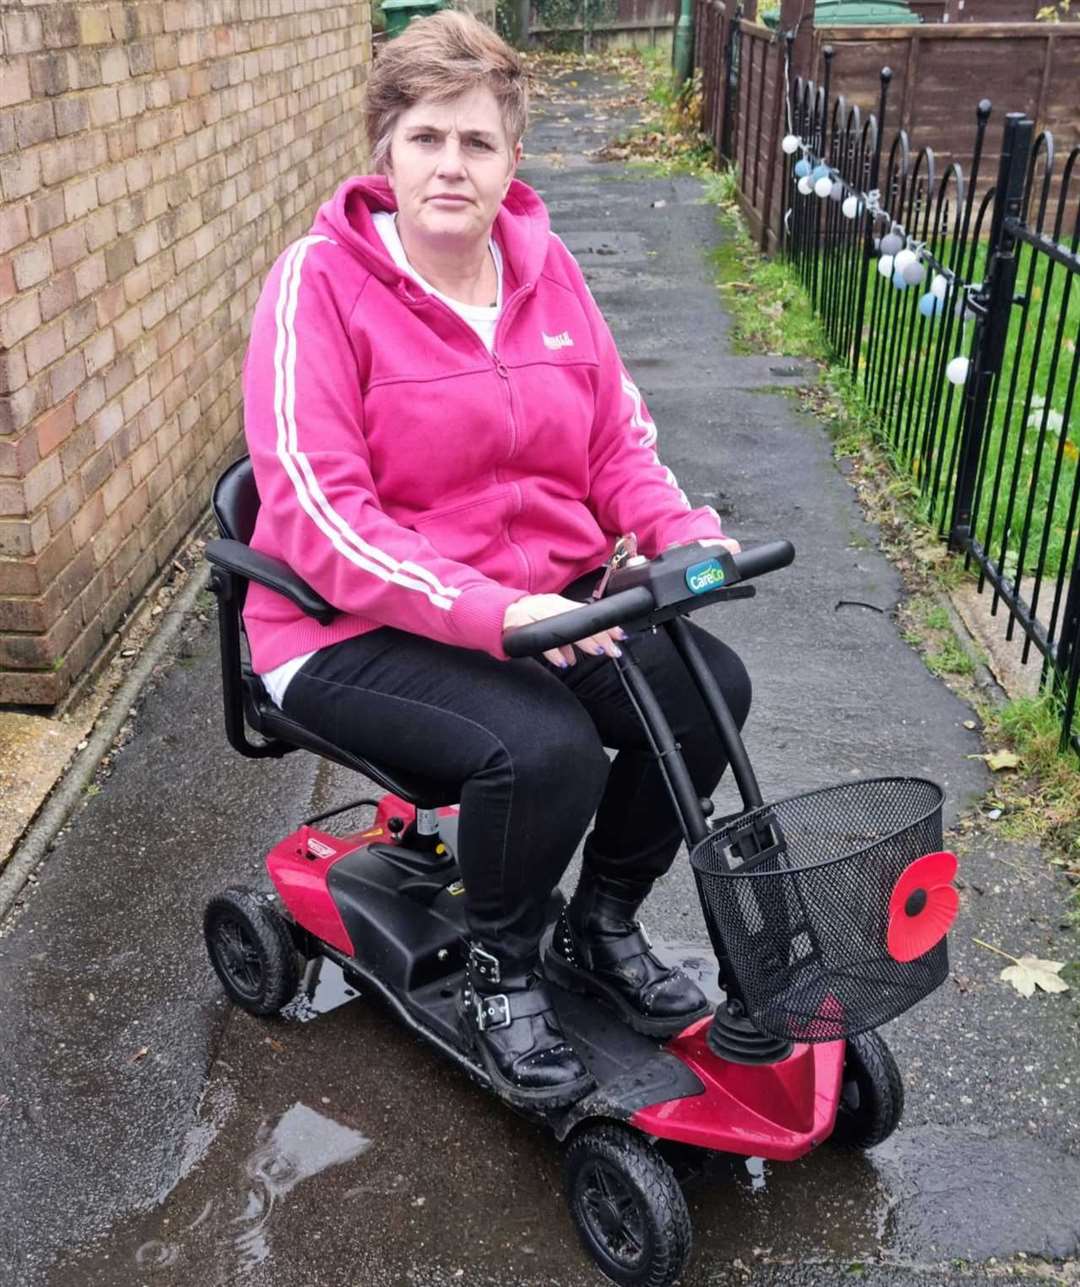 Lesley McMaster has been refused service on a Maidstone bus due to her mobility scooter